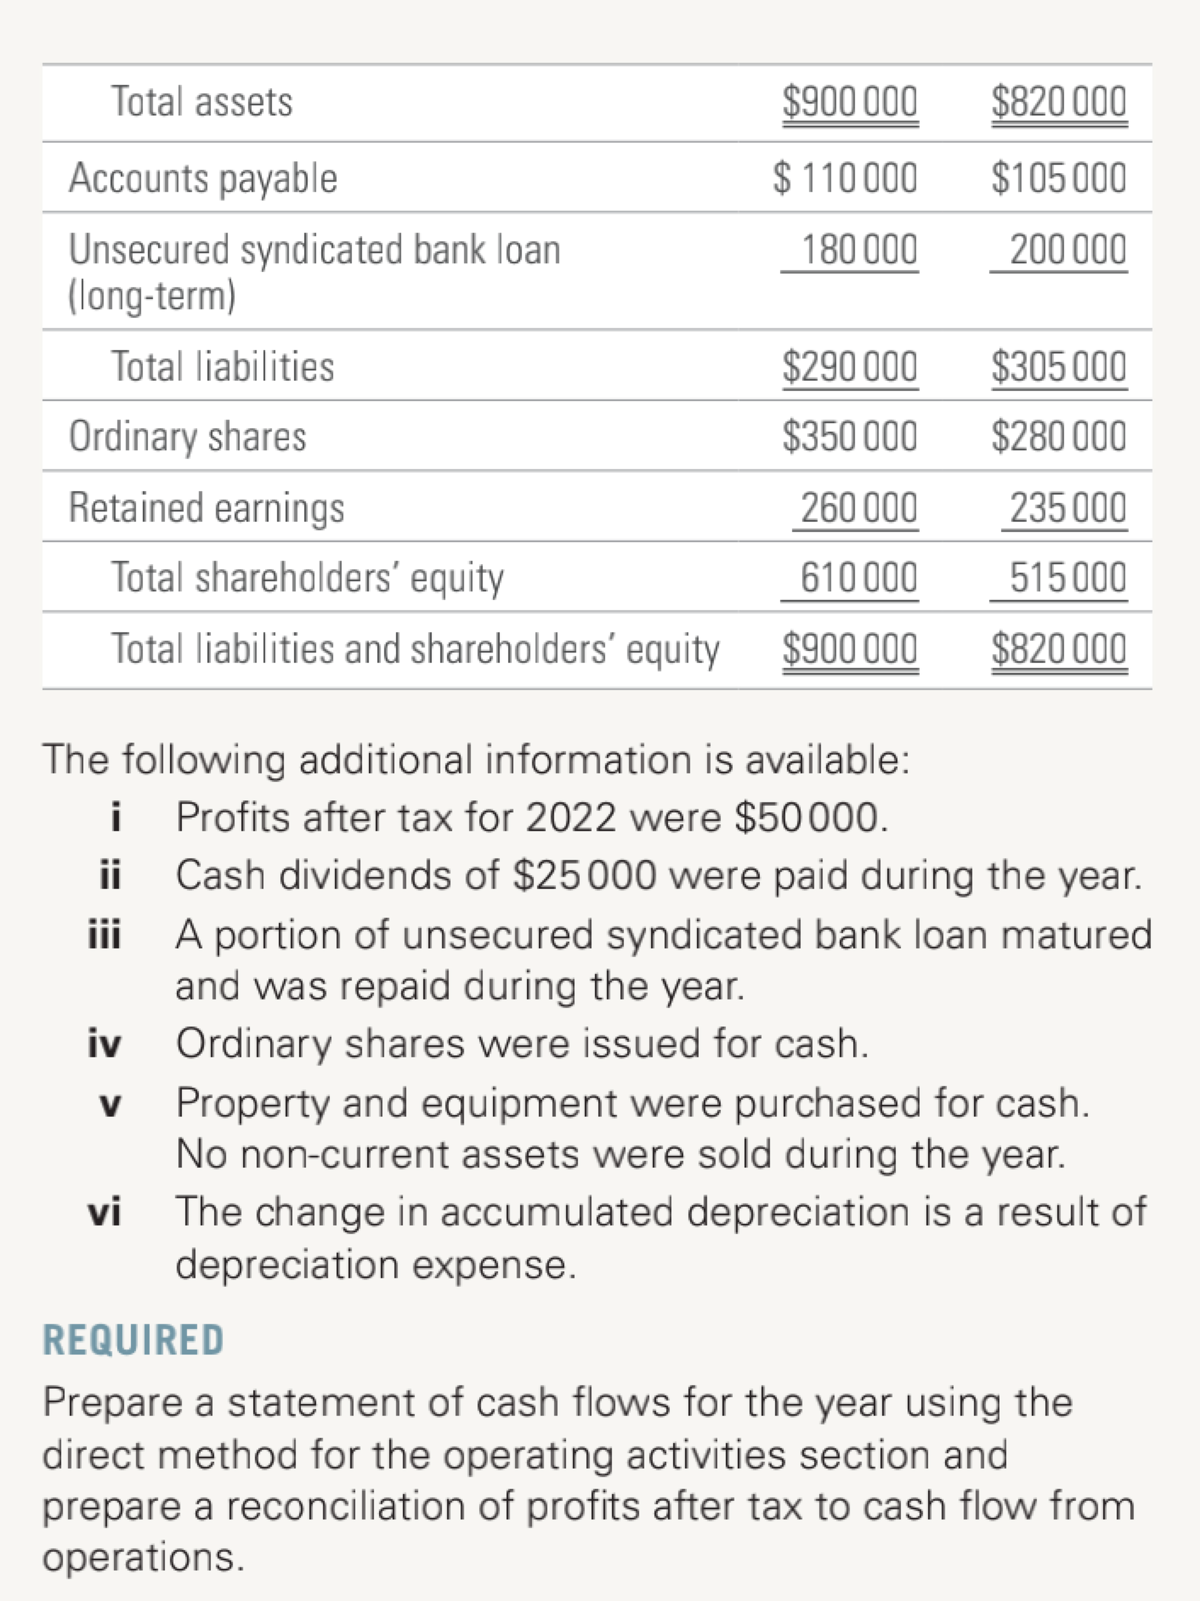 Total assets
$900 000
$820 000
Accounts payable
$ 110 000
$105 000
Unsecured syndicated bank loan
(long-term)
180 000
200 000
Total liabilities
$290 000
$305 000
Ordinary shares
$350 000
$280 000
Retained earnings
260 000
235 000
Total shareholders' equity
610 000
515000
Total liabilities and shareholders' equity
$900 000
$820 000
The following additional information is available:
i
Profits after tax for 2022 were $50000.
ii
Cash dividends of $25000 were paid during the year.
A portion of unsecured syndicated bank loan matured
and was repaid during the year.
iii
iv
Ordinary shares were issued for cash.
Property and equipment were purchased for cash.
No non-current assets were sold during the year.
The change in accumulated depreciation is a result of
depreciation expense.
V
vi
REQUIRED
Prepare a statement of cash flows for the year using the
direct method for the operating activities section and
prepare a reconciliation of profits after tax to cash flow from
operations.
